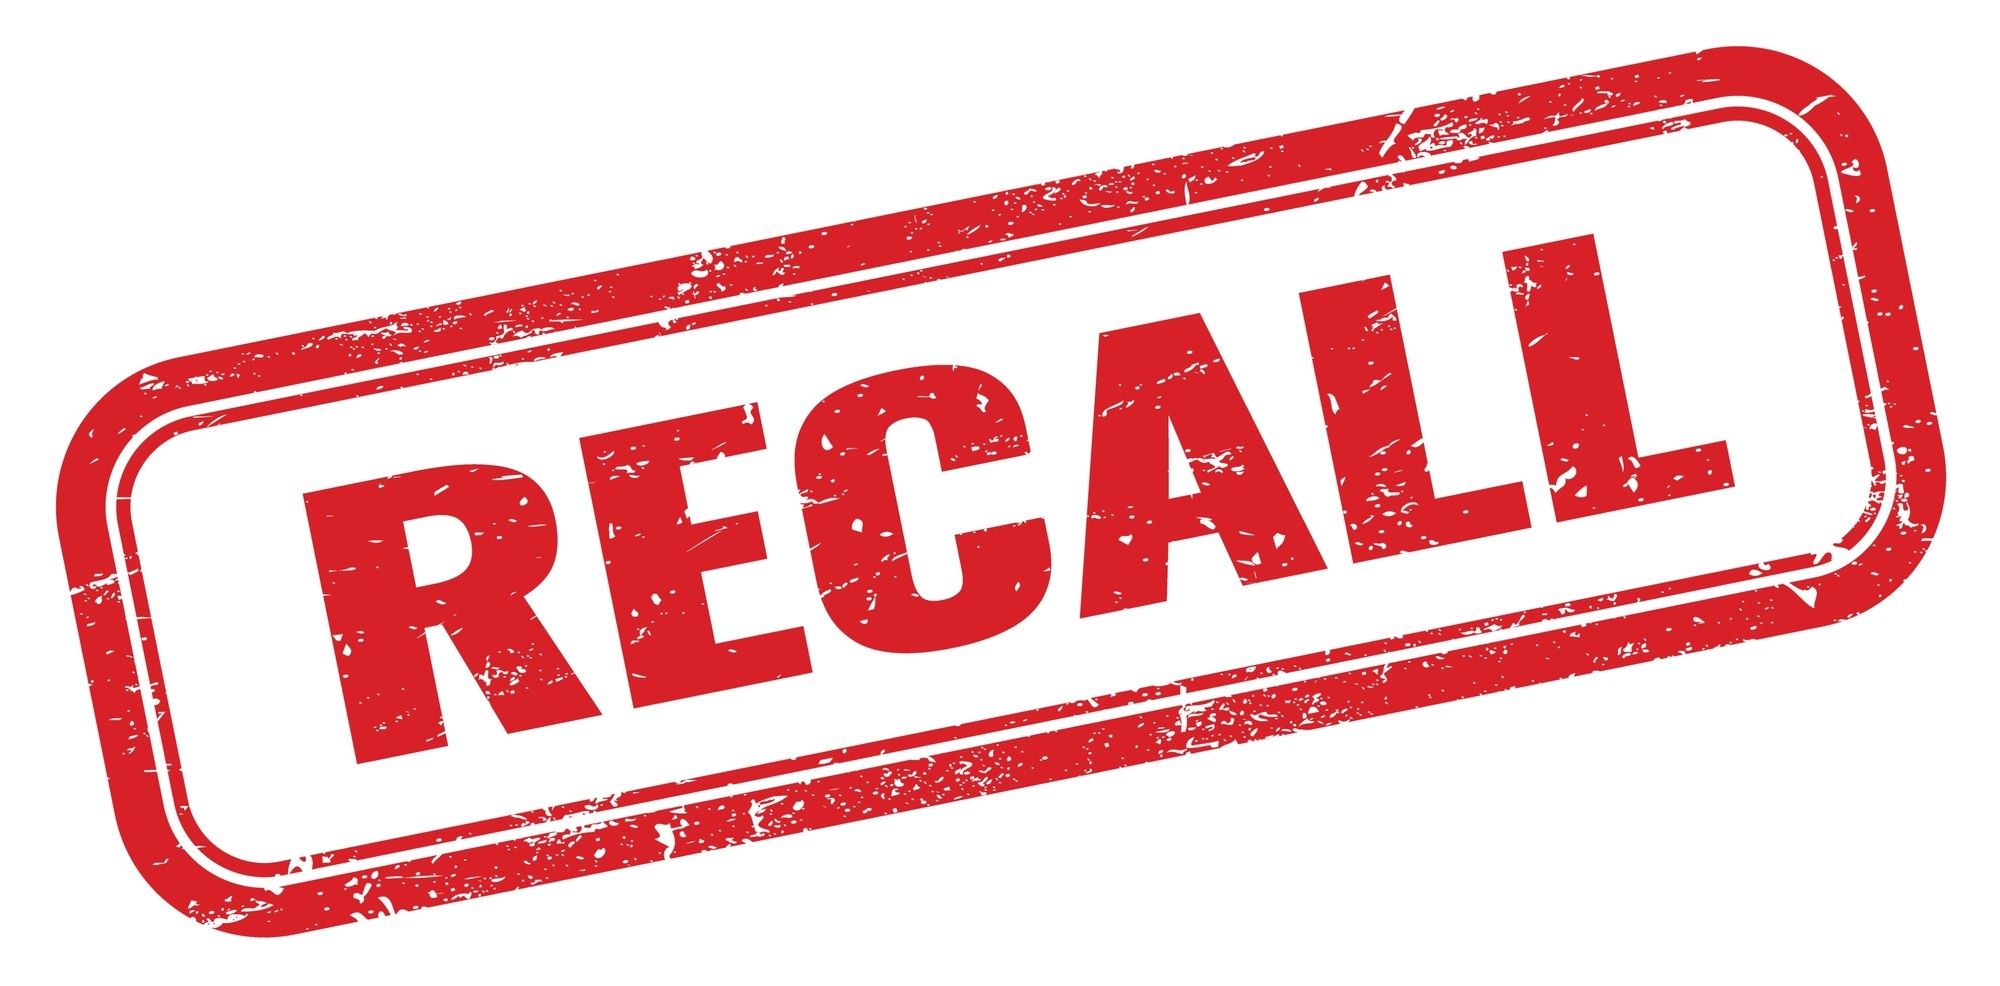 Home Depot chair recalled over detaching back